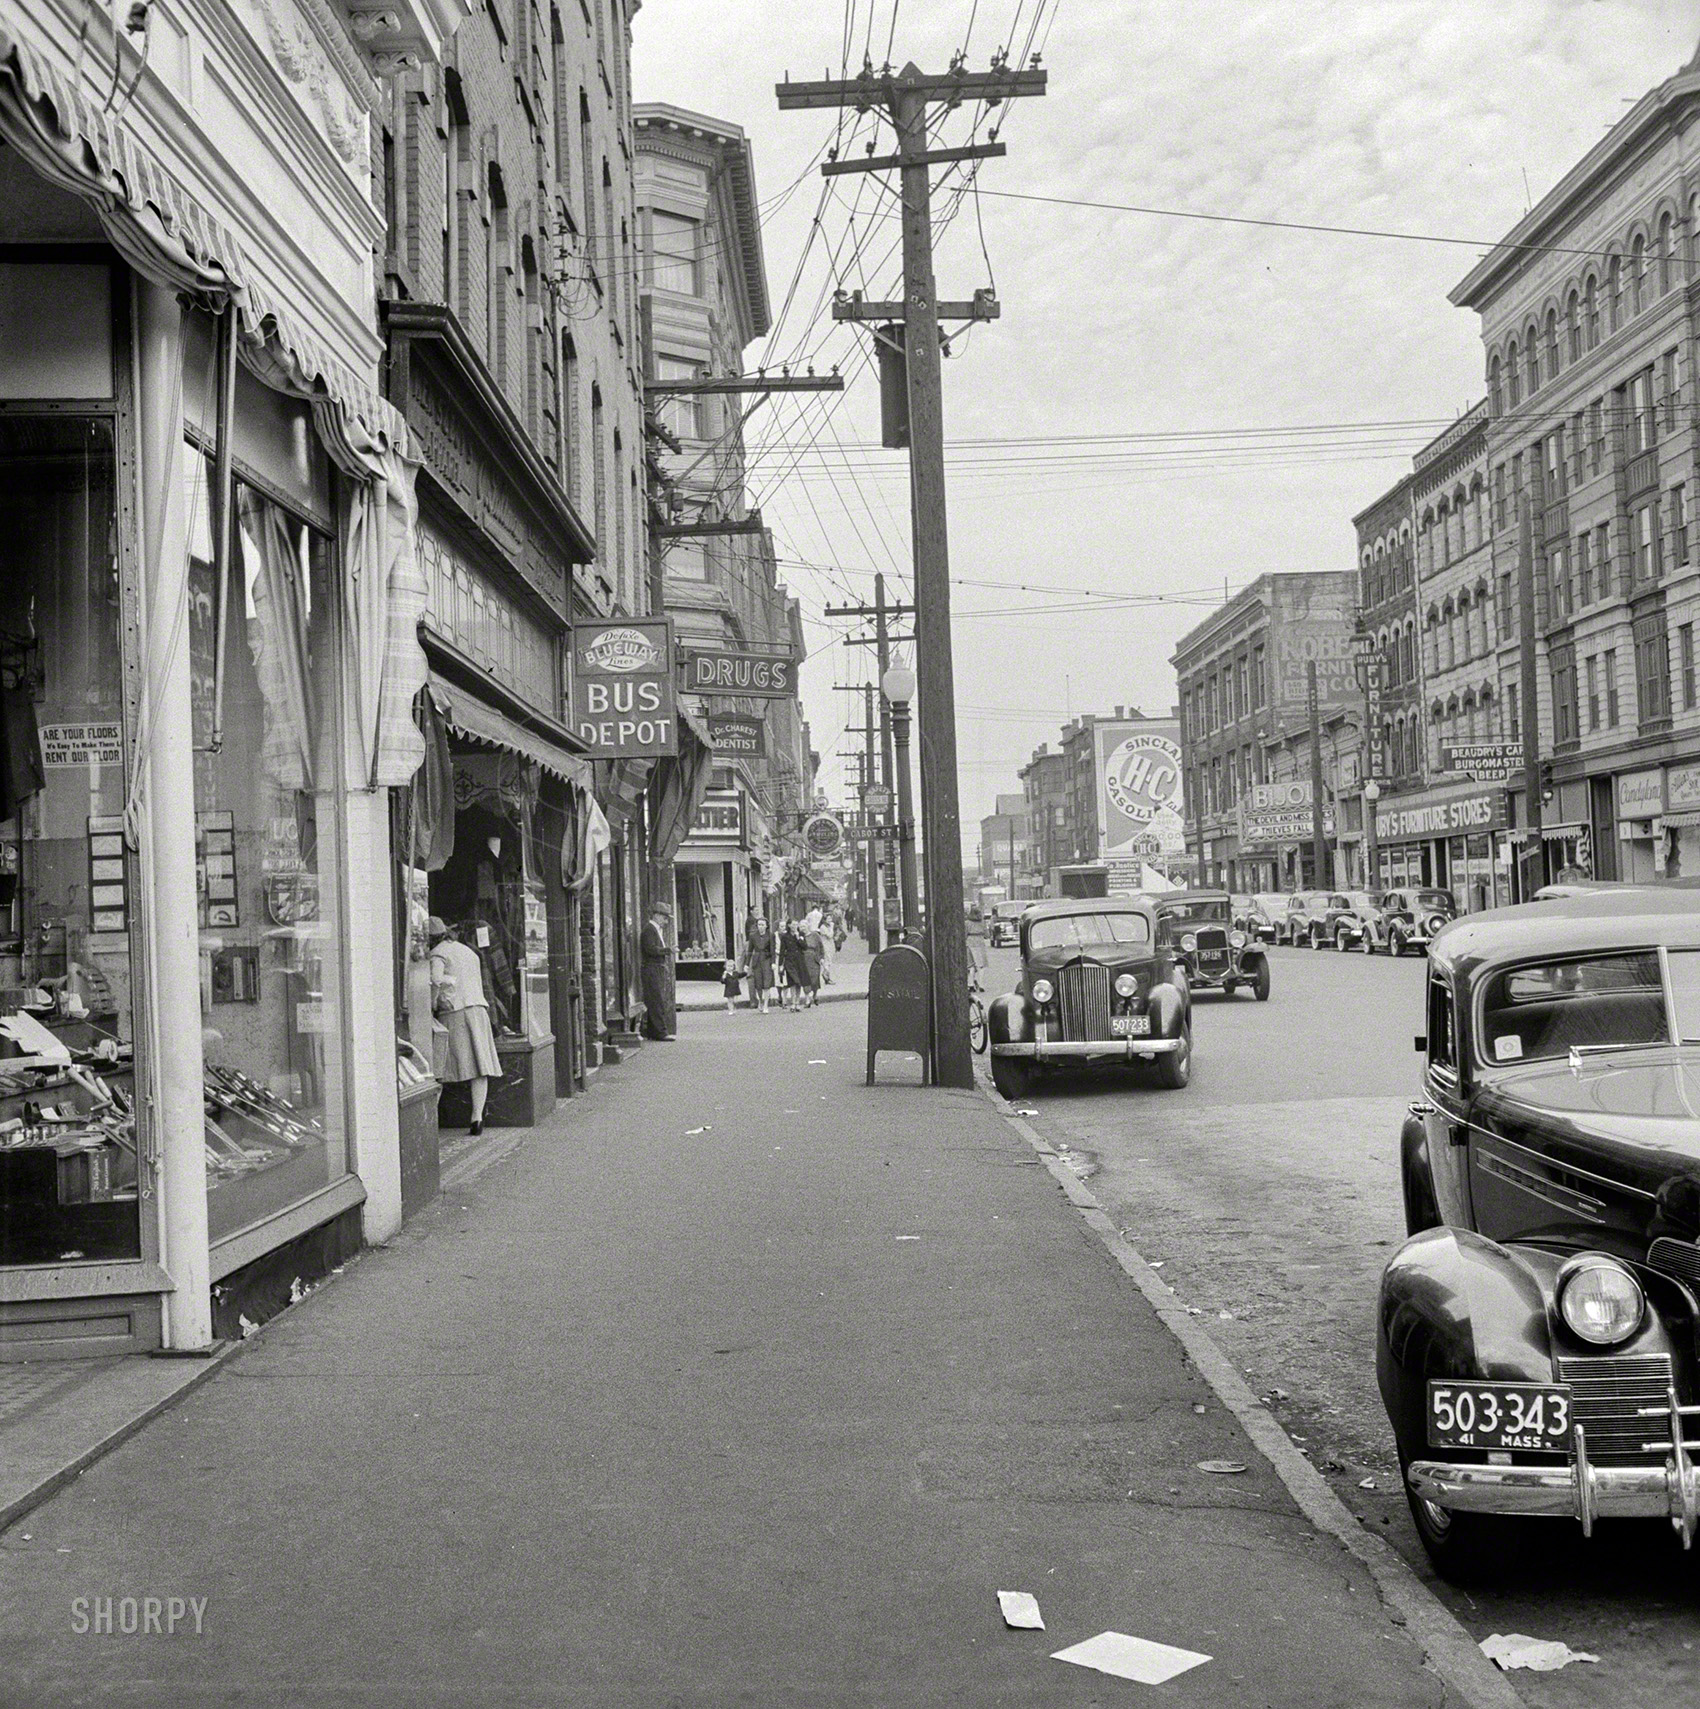 October 1941. "Main Street, Holyoke, Massachusetts." Home to the Deluxe Blueway Lines bus depot and, across the street, the movie palace also seen here. Medium format nitrate negative by John Collier. View full size.